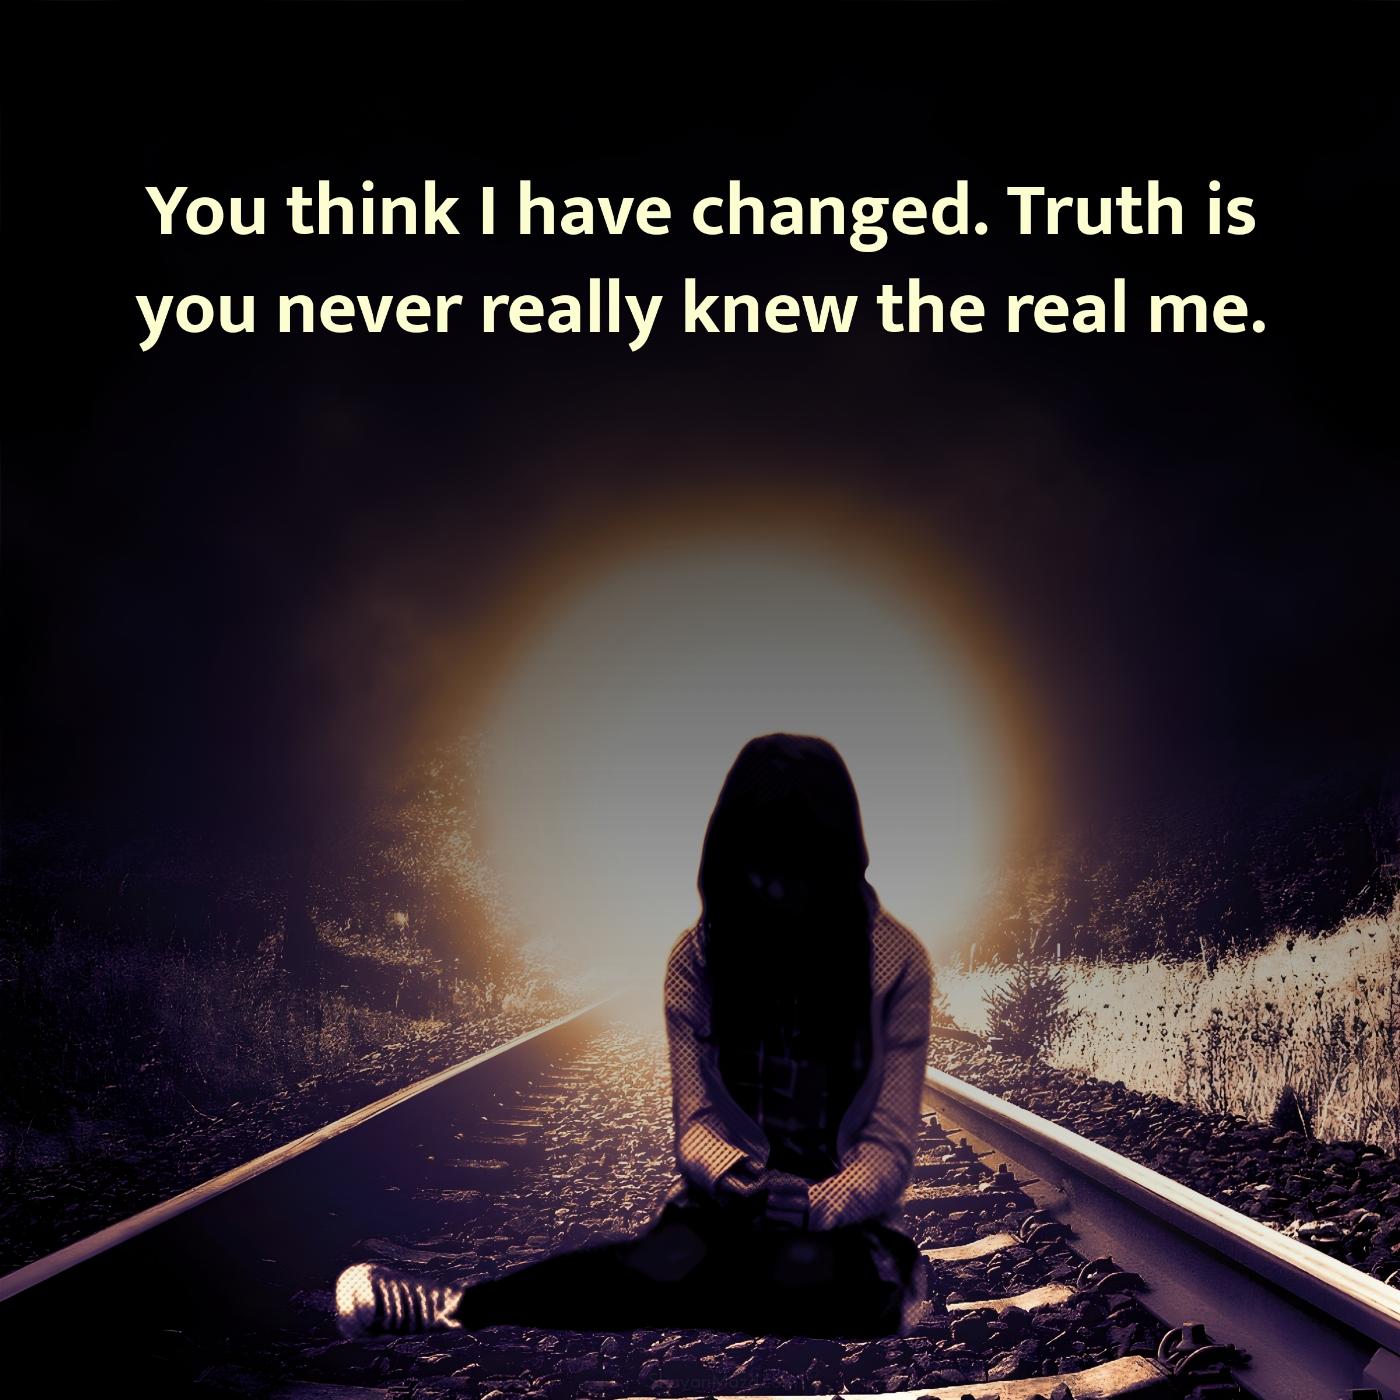 You think I have changed Truth is you never really knew